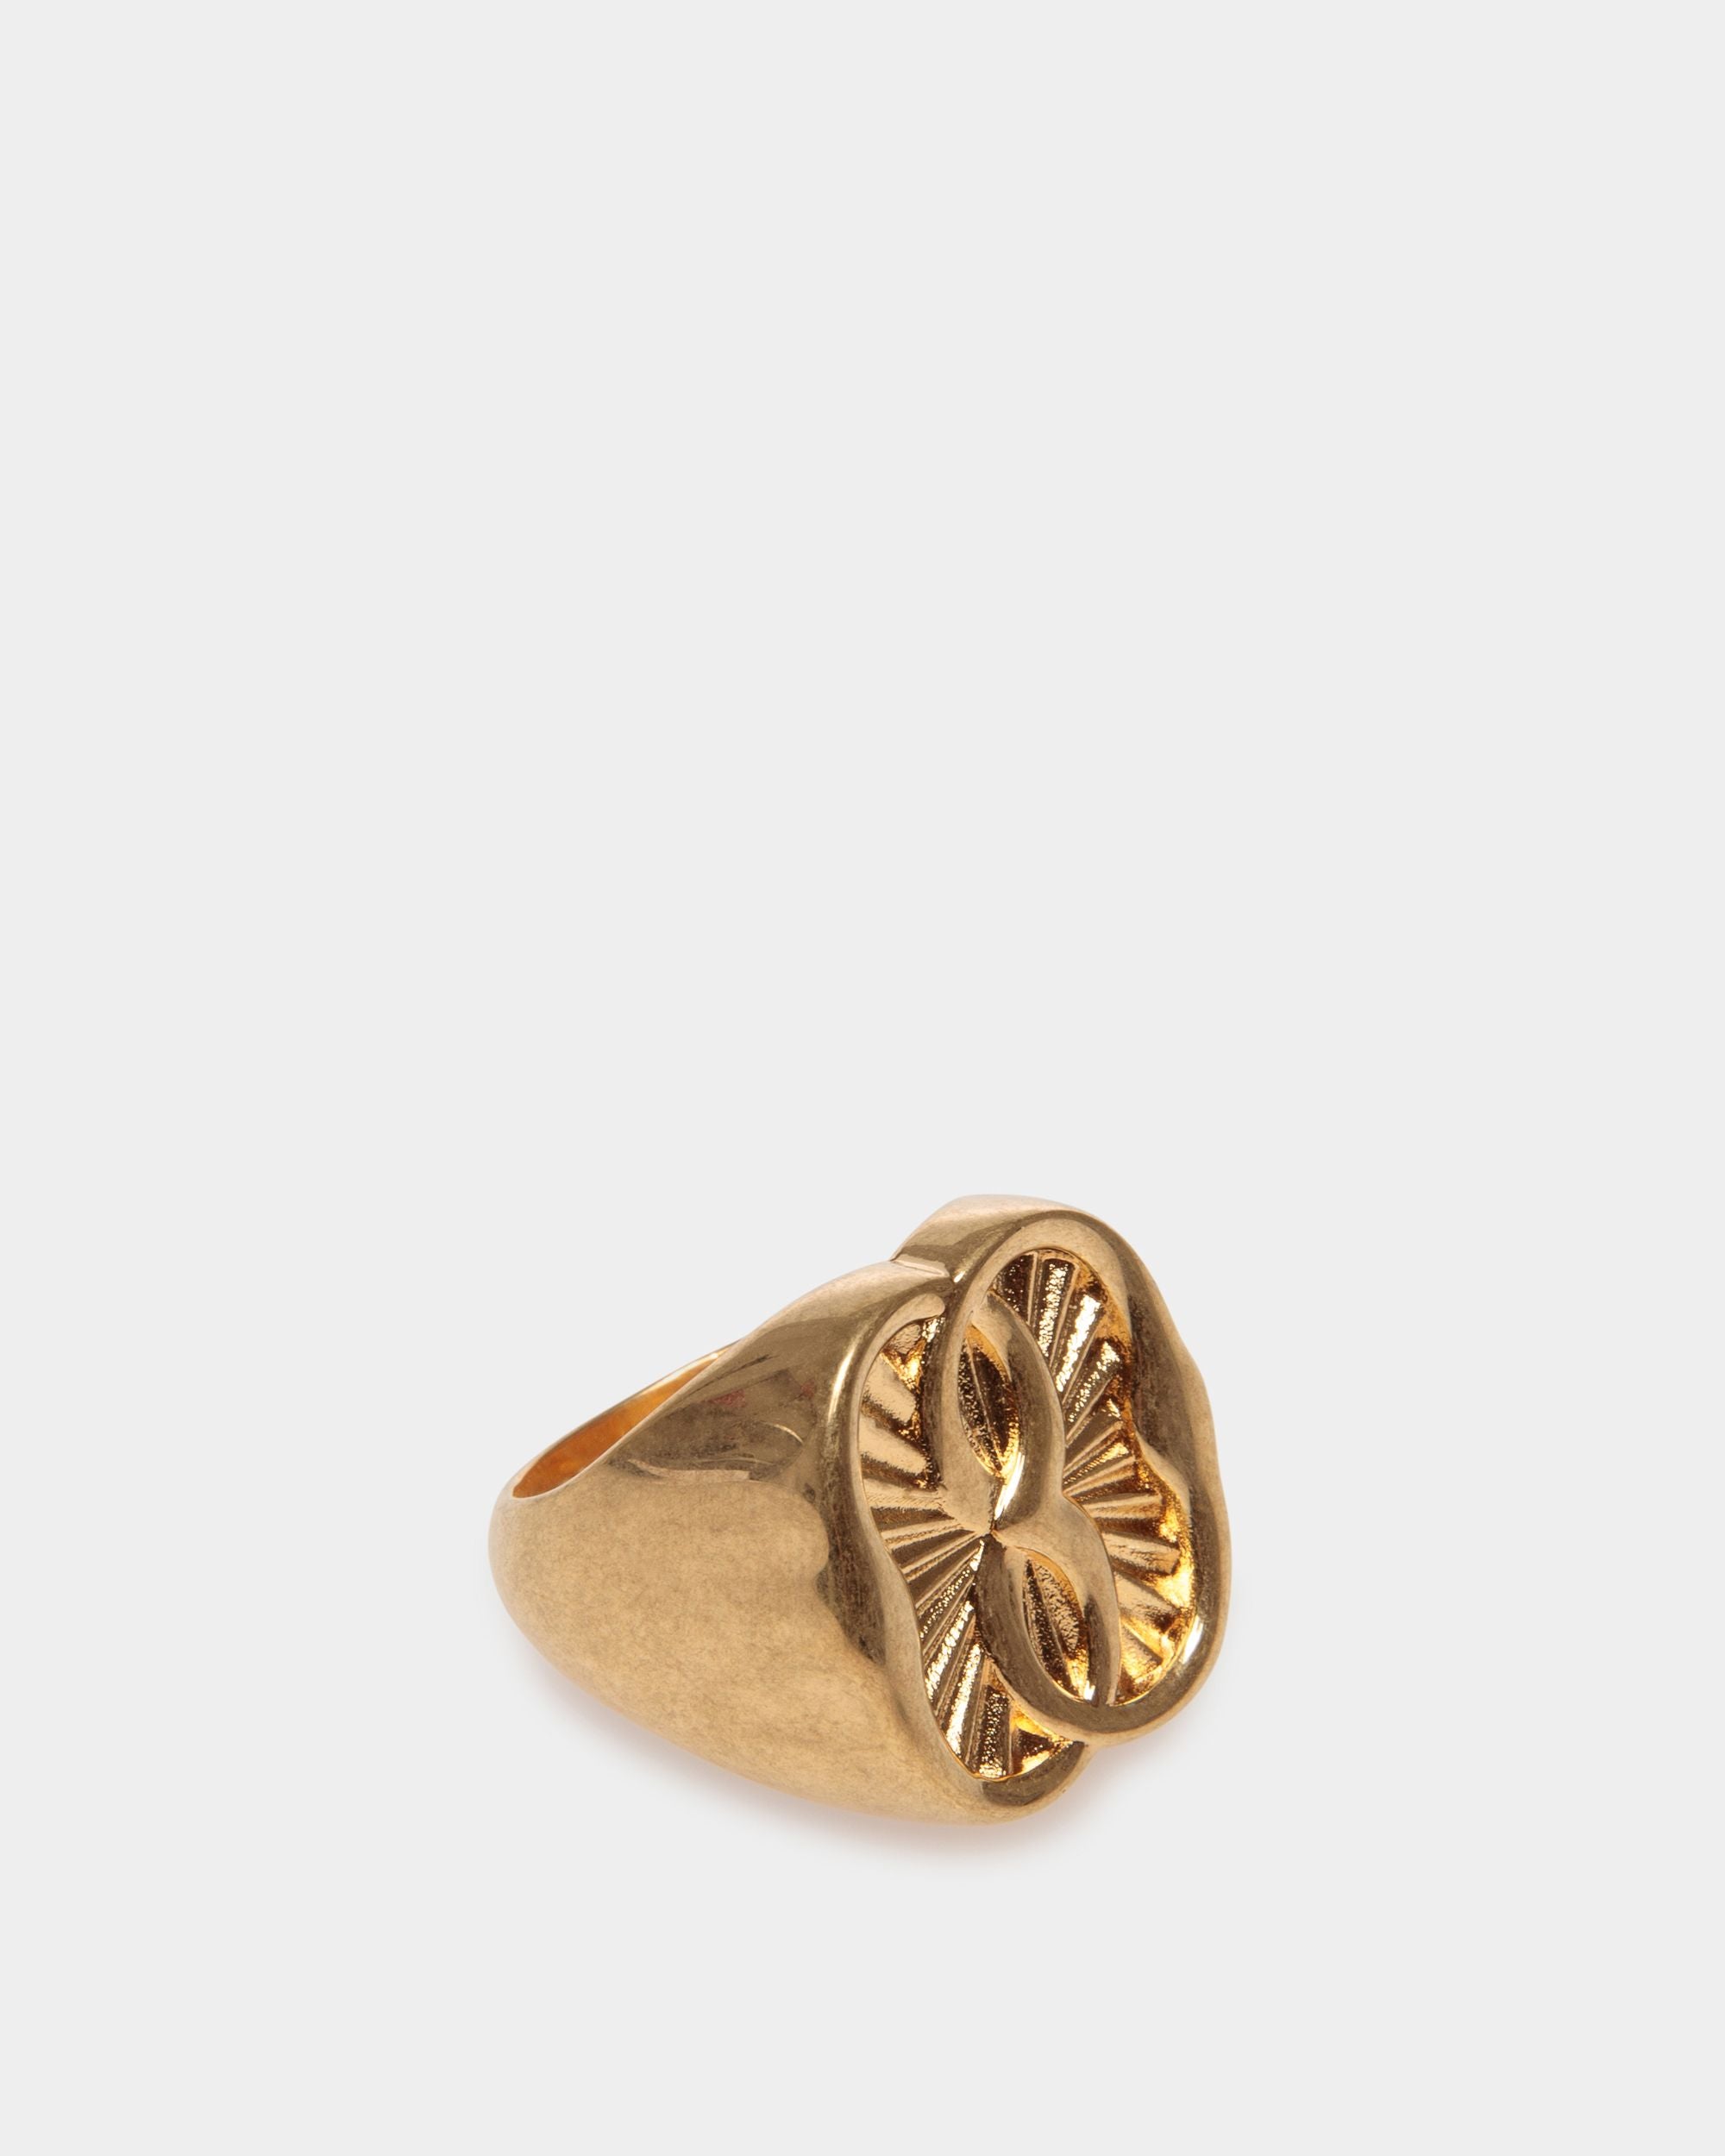 Emblem | Women's Ring in Gold Eco Brass | Bally | Still Life Front